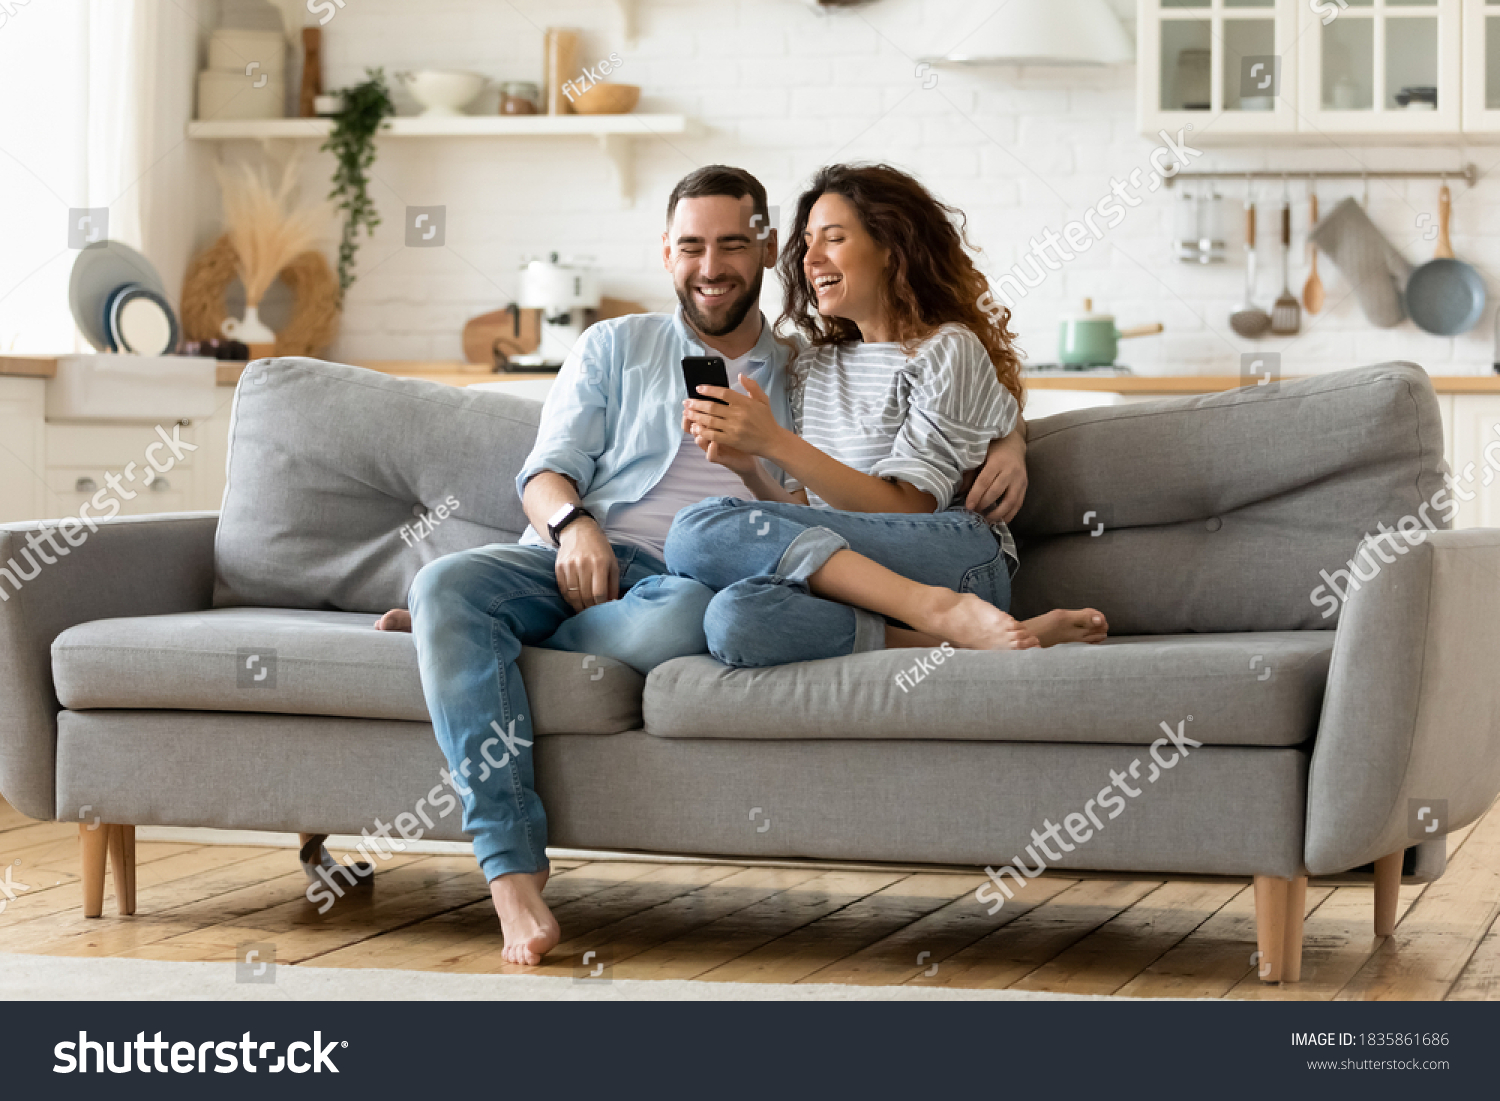 Happy young woman and man hugging, using smartphone together, sitting on cozy couch at home, smiling overjoyed wife and husband looking at phone screen, sitting on sofa in modern living room #1835861686